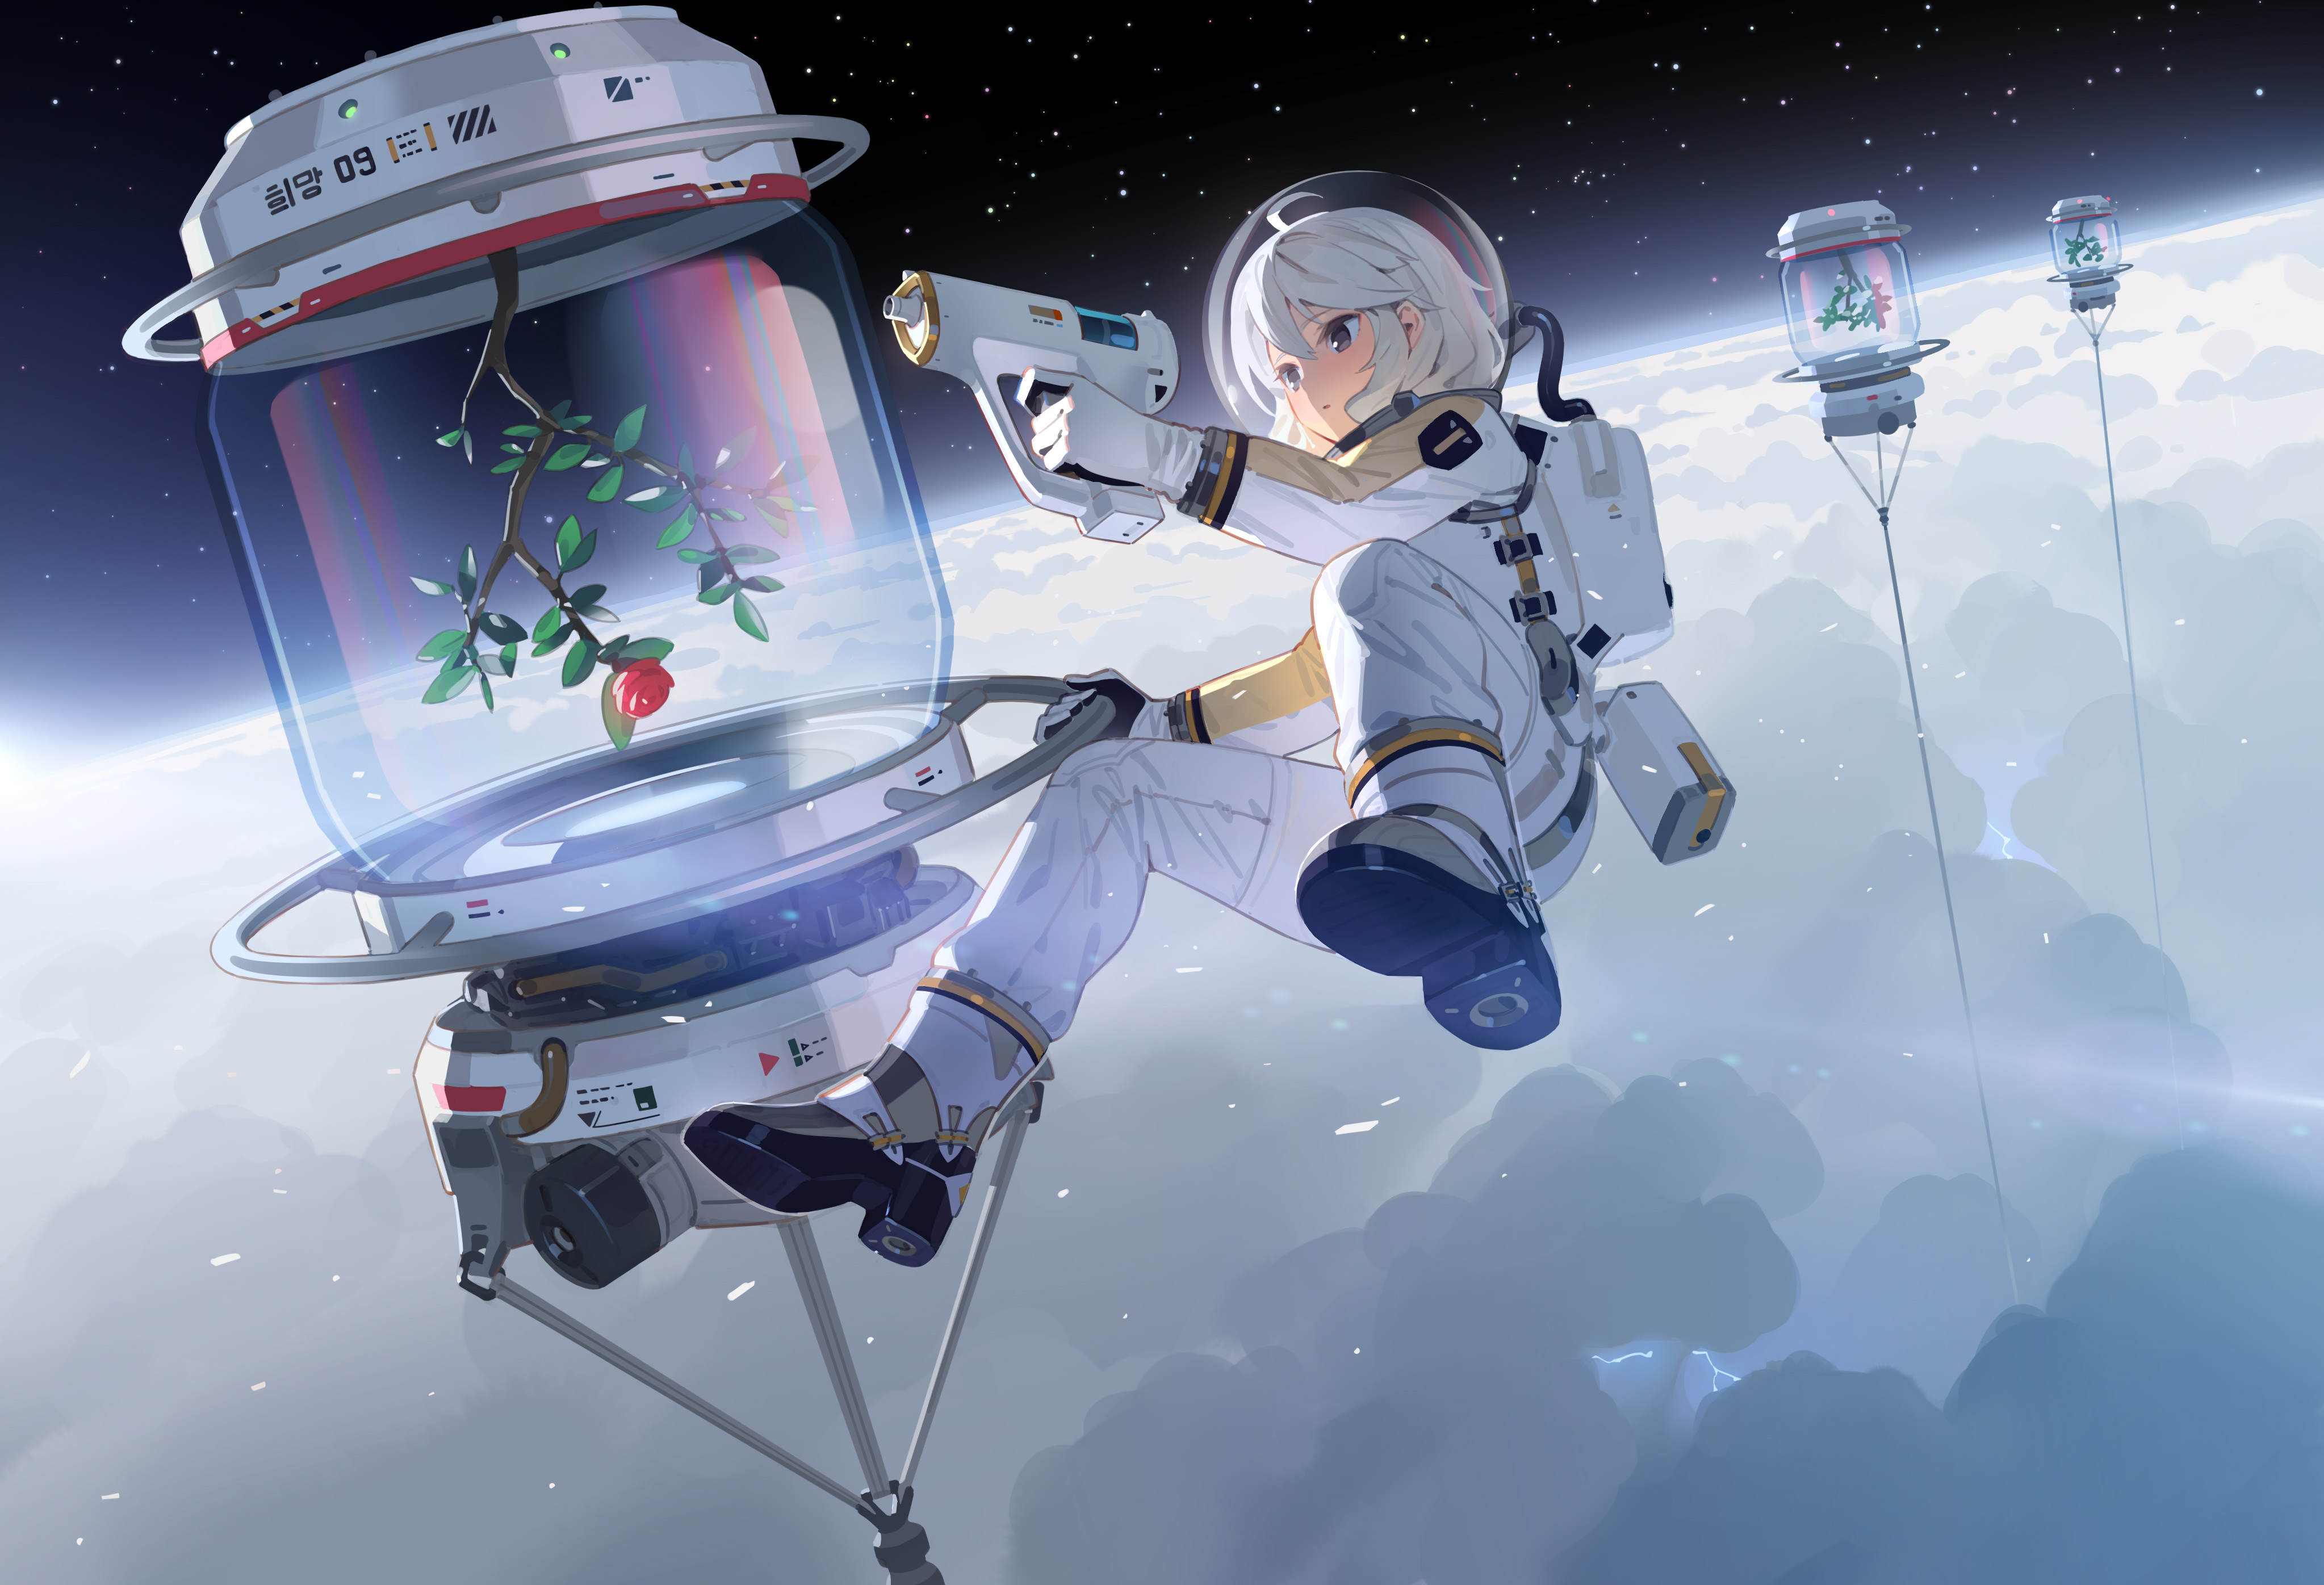 Anime Review: Planetes and Space Battleship Yamato